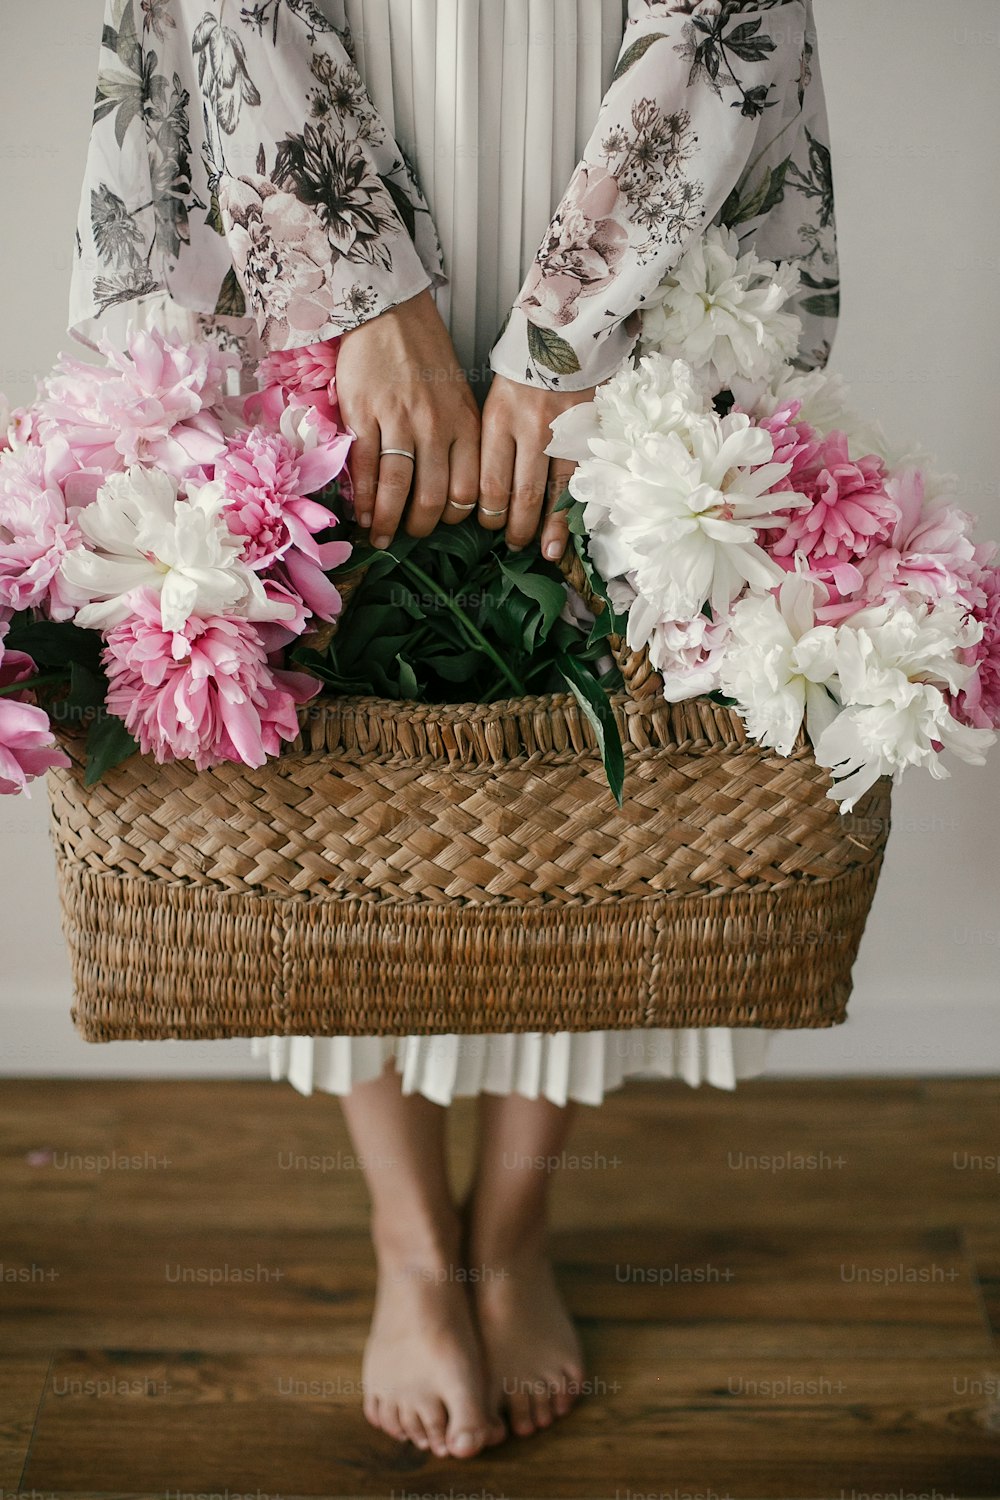 Boho girl holding pink and white peonies in rustic basket and standing barefoot on wooden floor. Stylish hipster woman in bohemian floral dress with peony flowers. International Womens Day